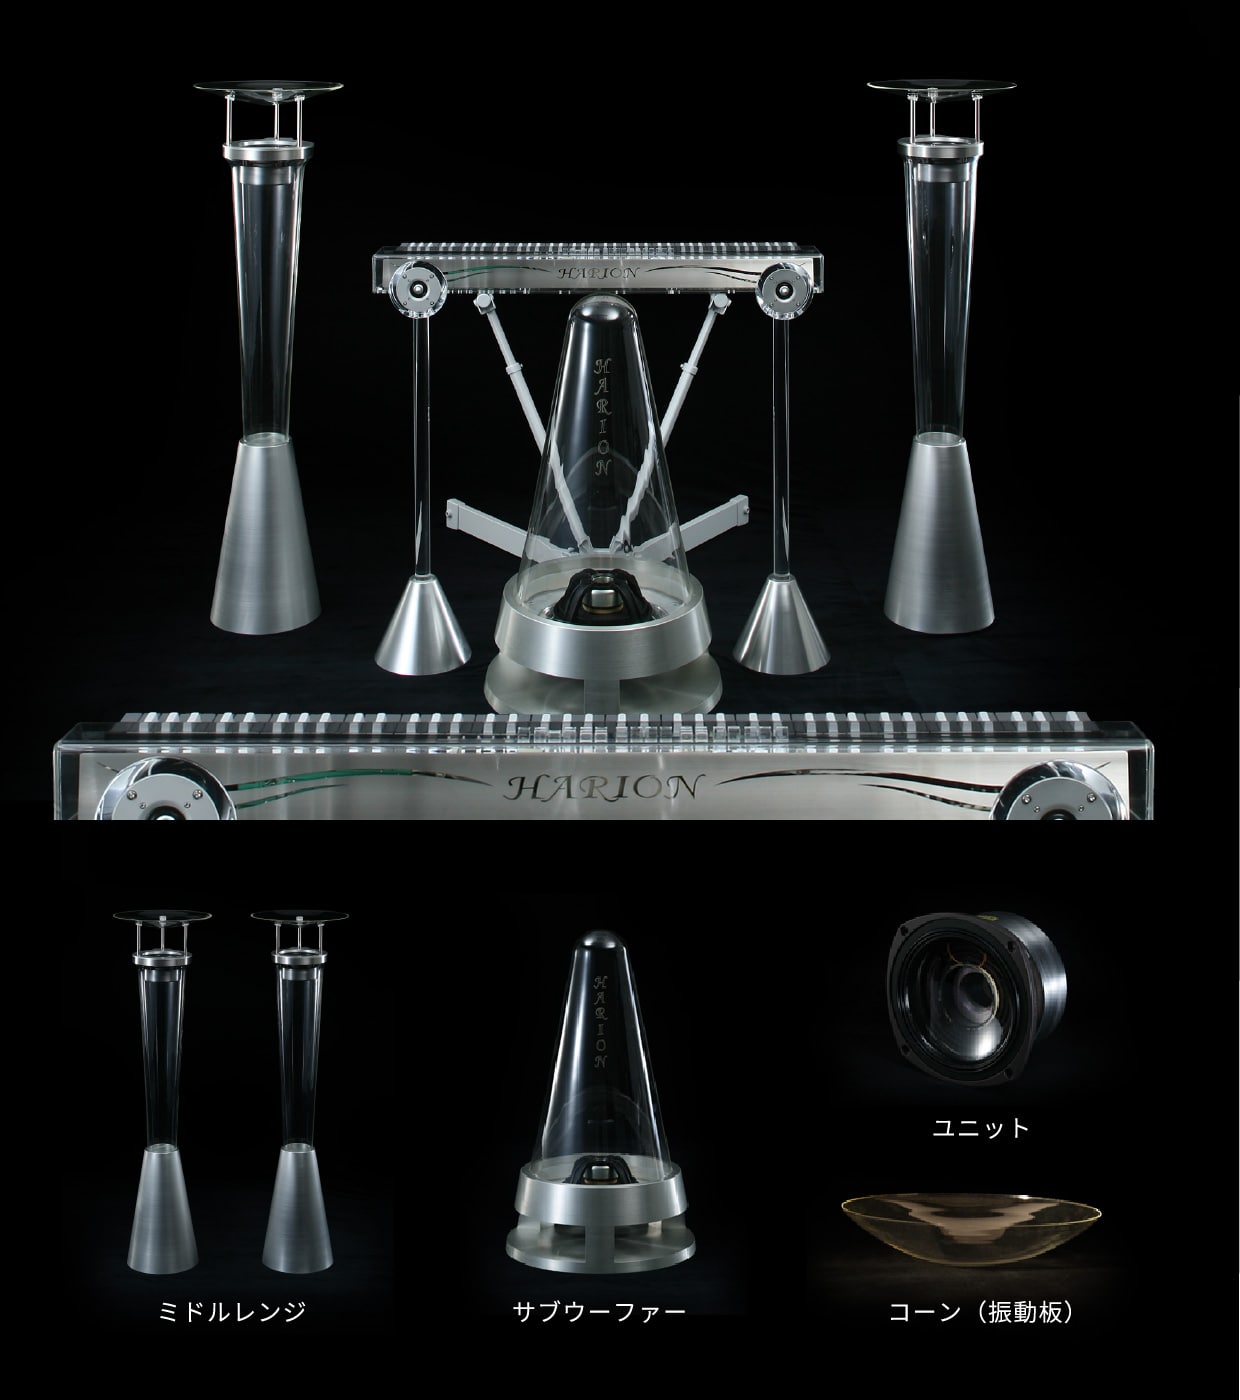 'Harion' glass cone speaker system